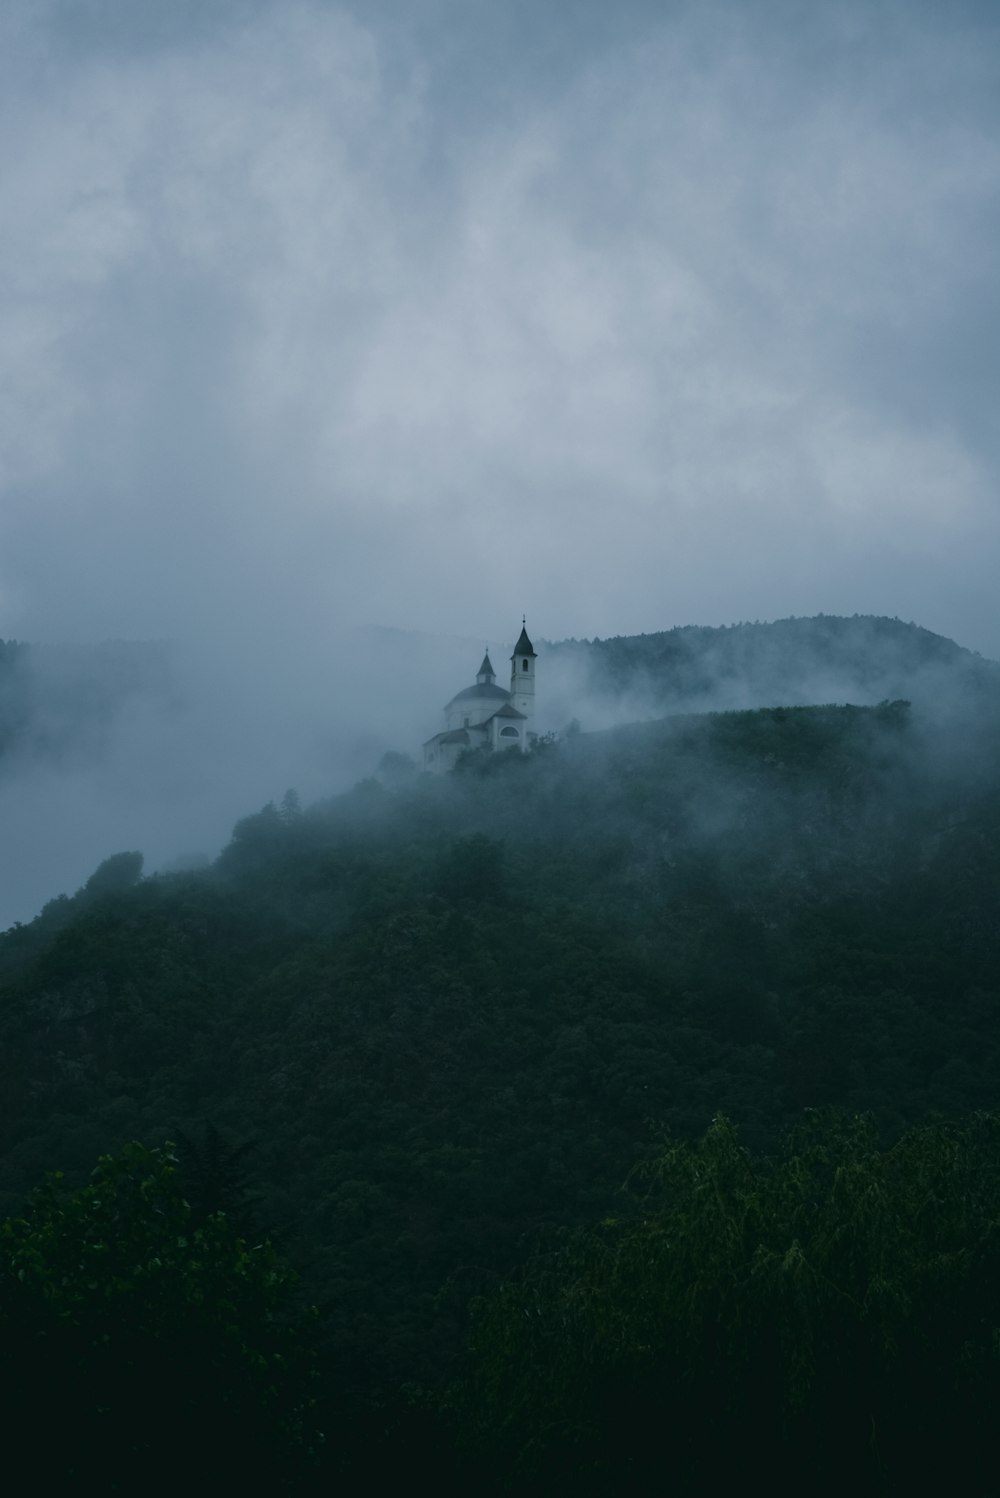 a church on top of a hill covered in fog